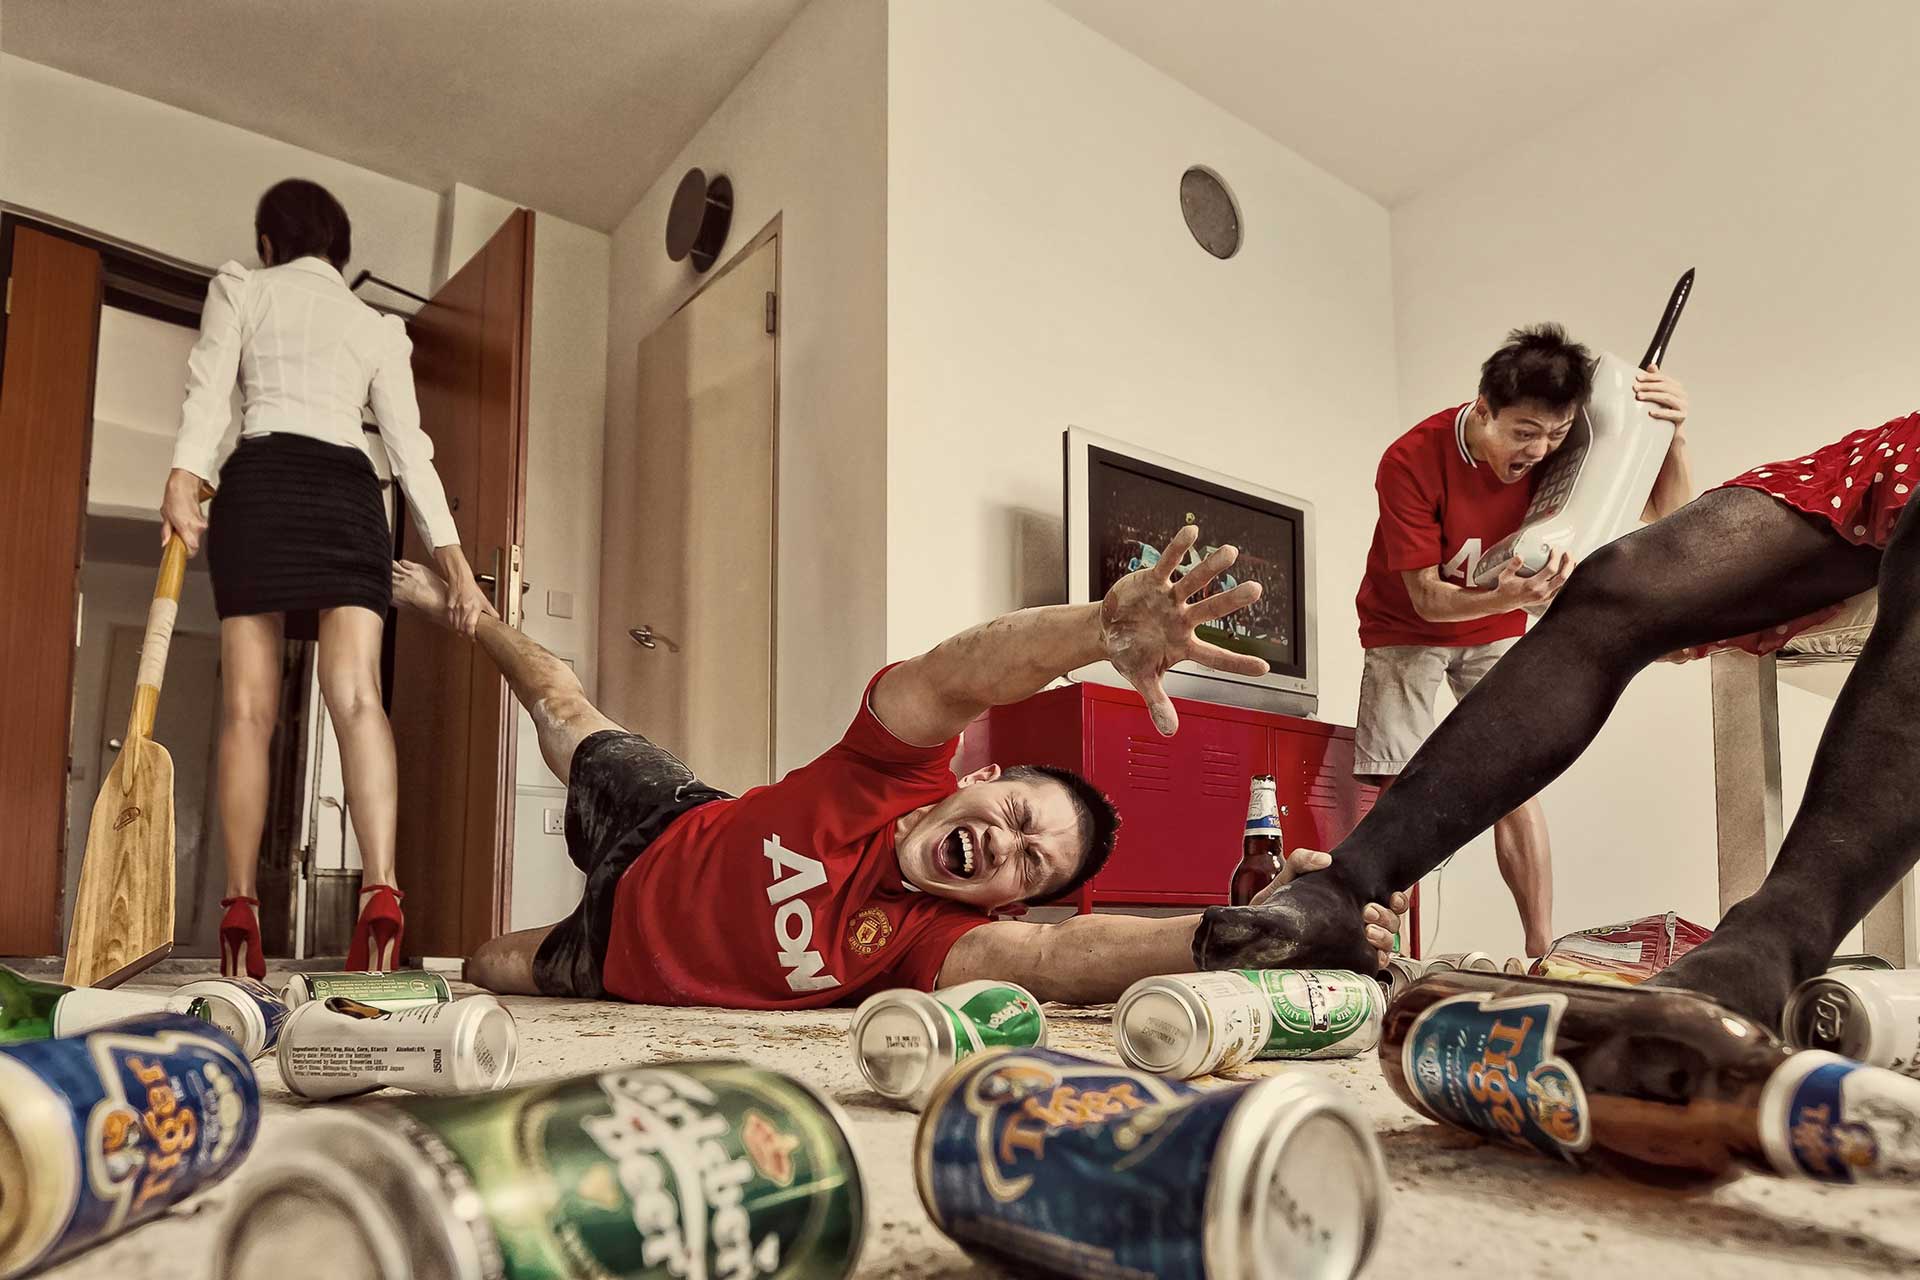 Man lying on floor surrounded by beer cans, part of creative pre-wedding photography with humorous moments.